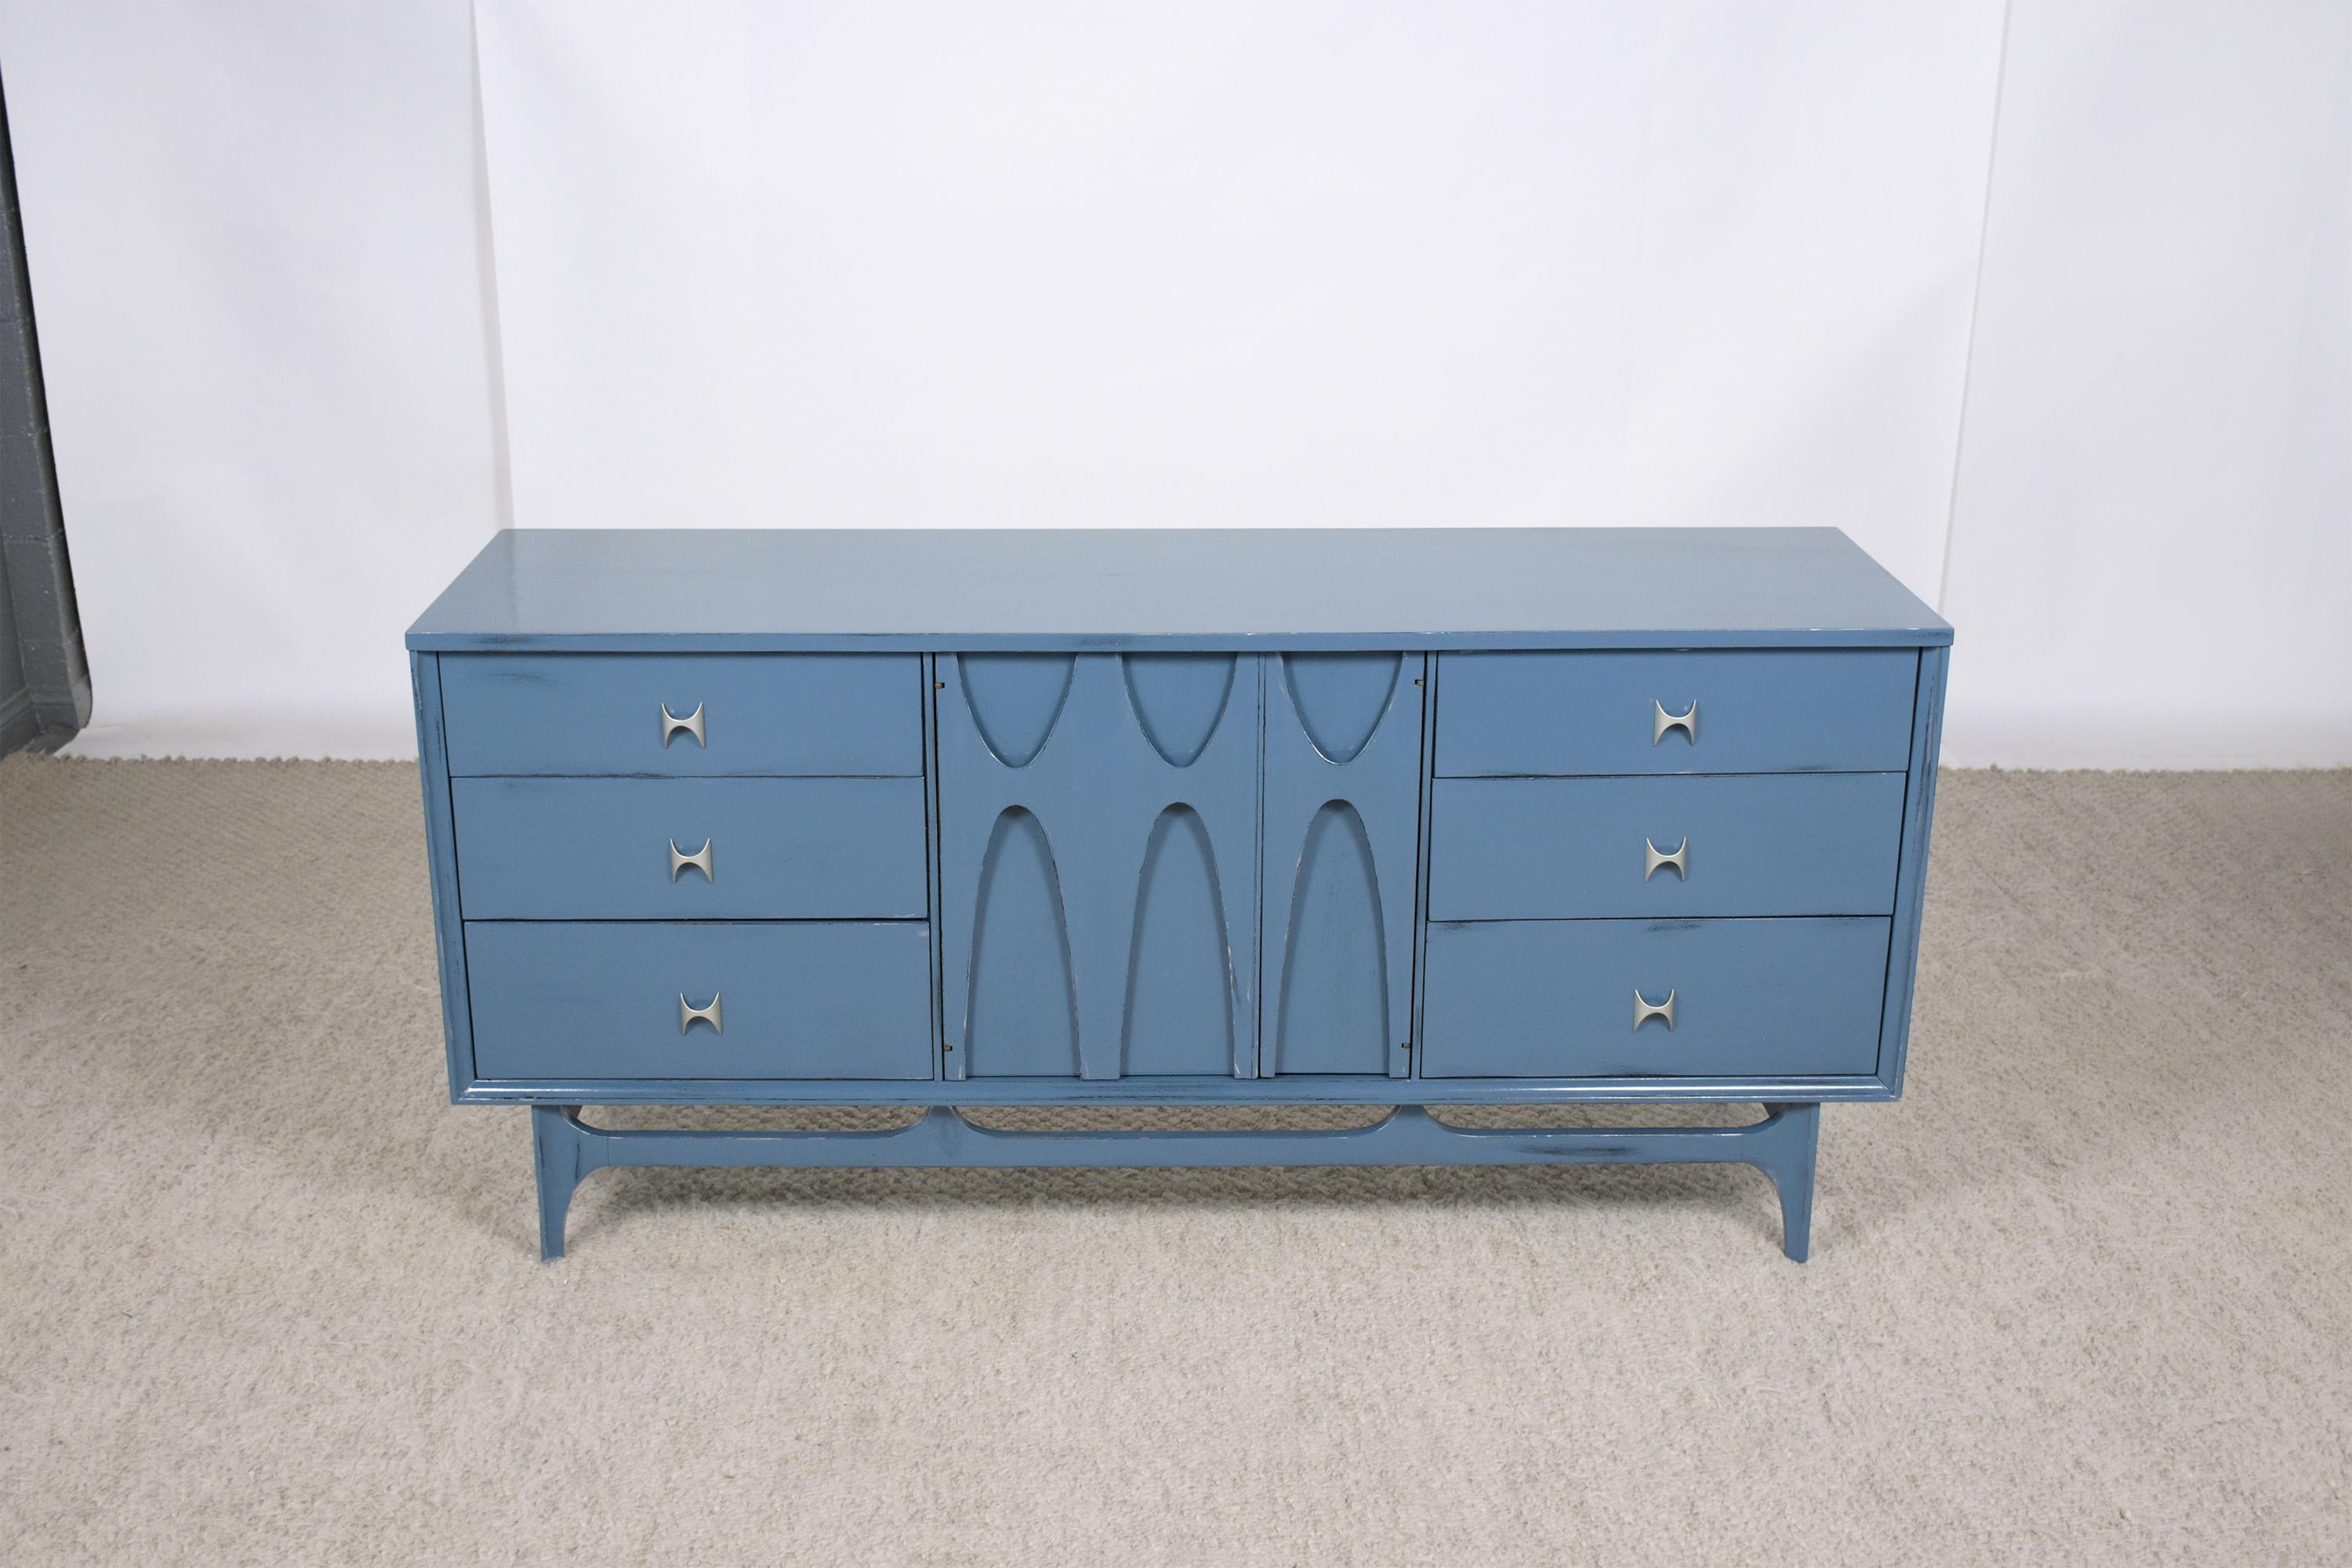 Carved Restored Broyhill Brasilia Credenza: 1960s Mid-Century Modern Chic For Sale